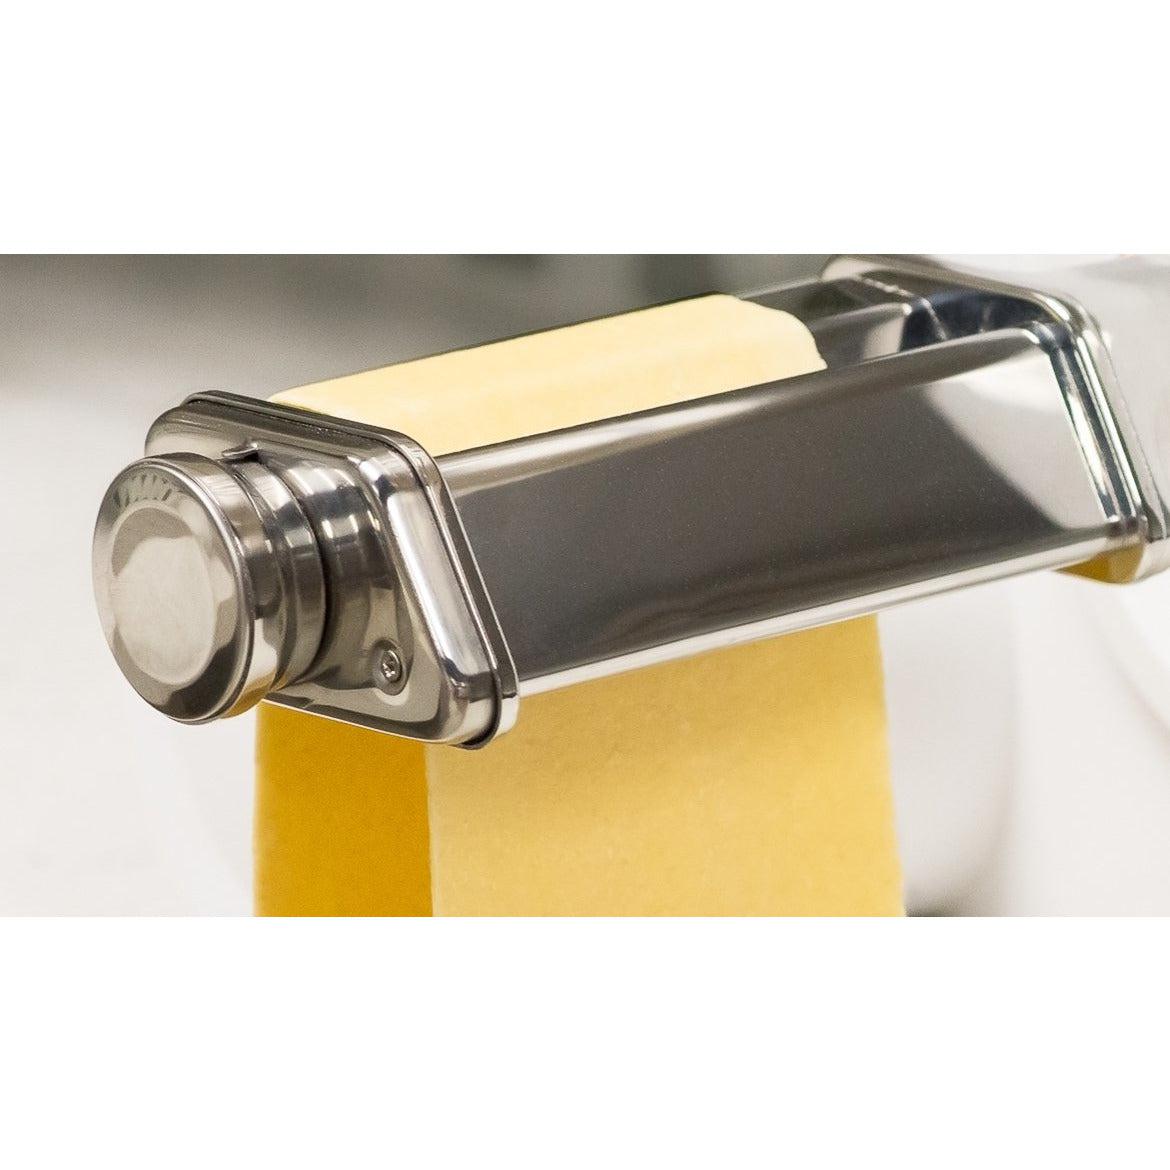 How To Use The Pasta Set Attachment - Bosch Mixers USA